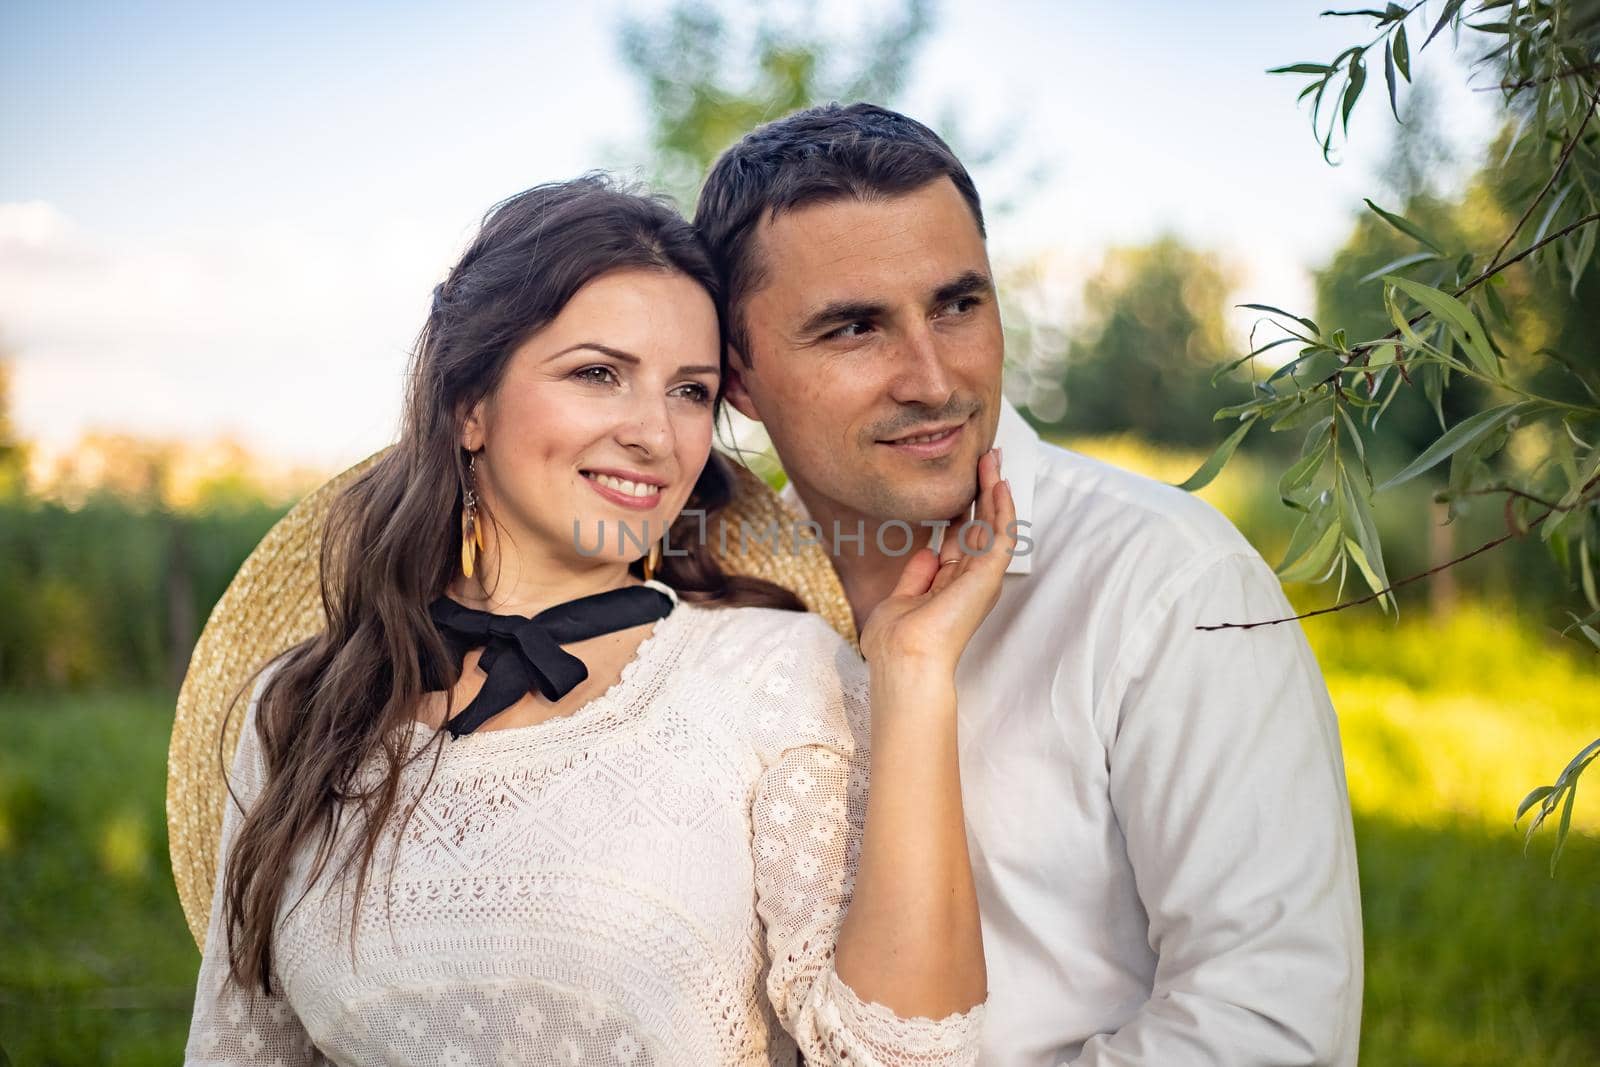 Sensual portrait of a young couple. Wedding photo outdoor.